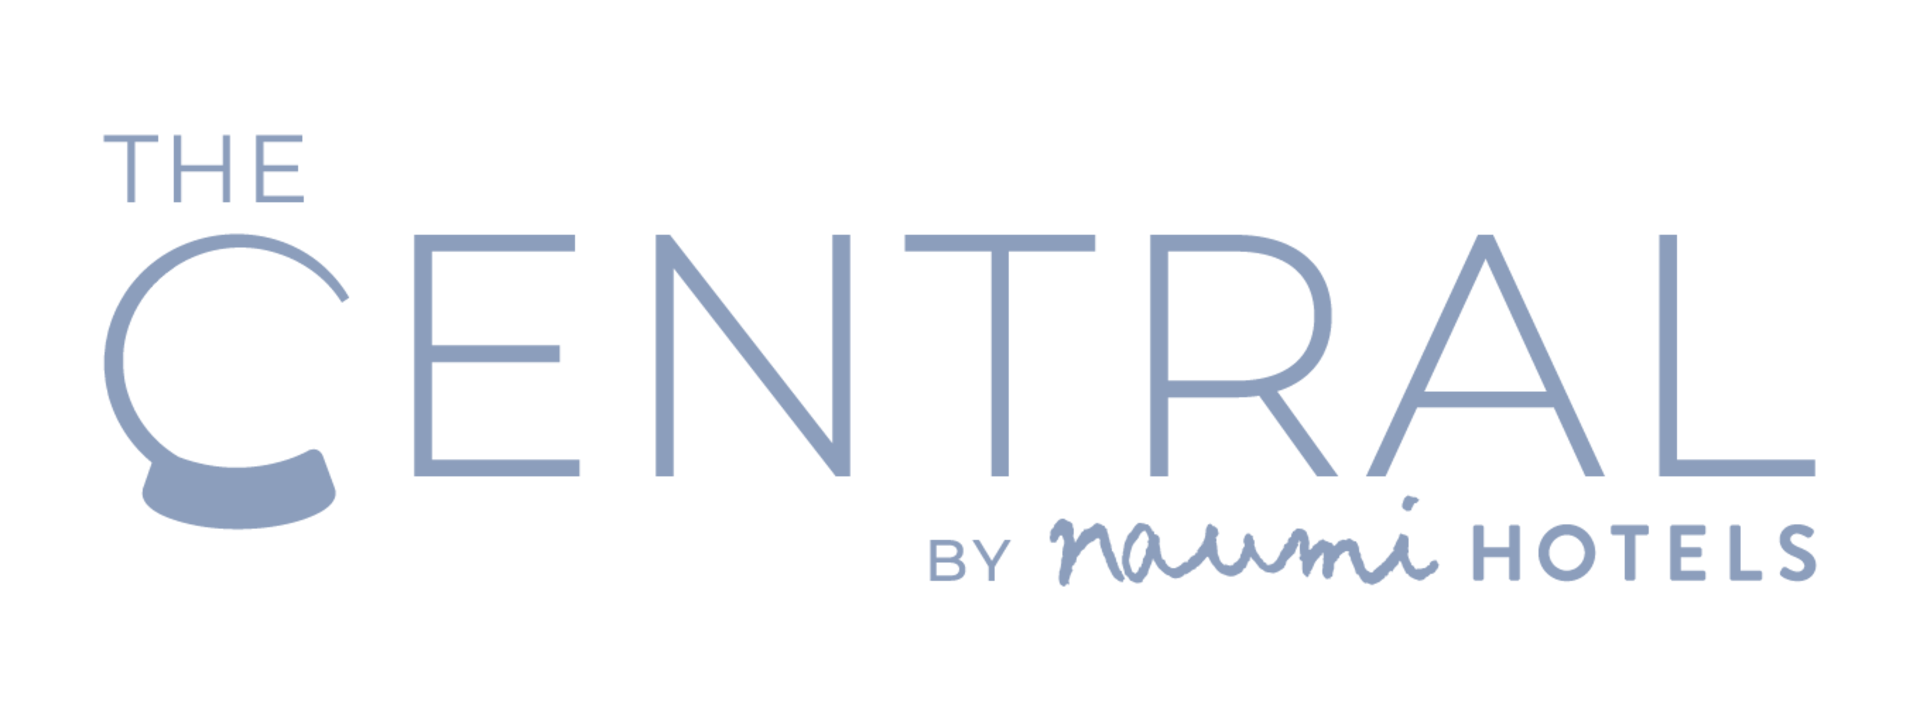 the-central-by-naumi-hotels-logo-01_2.png